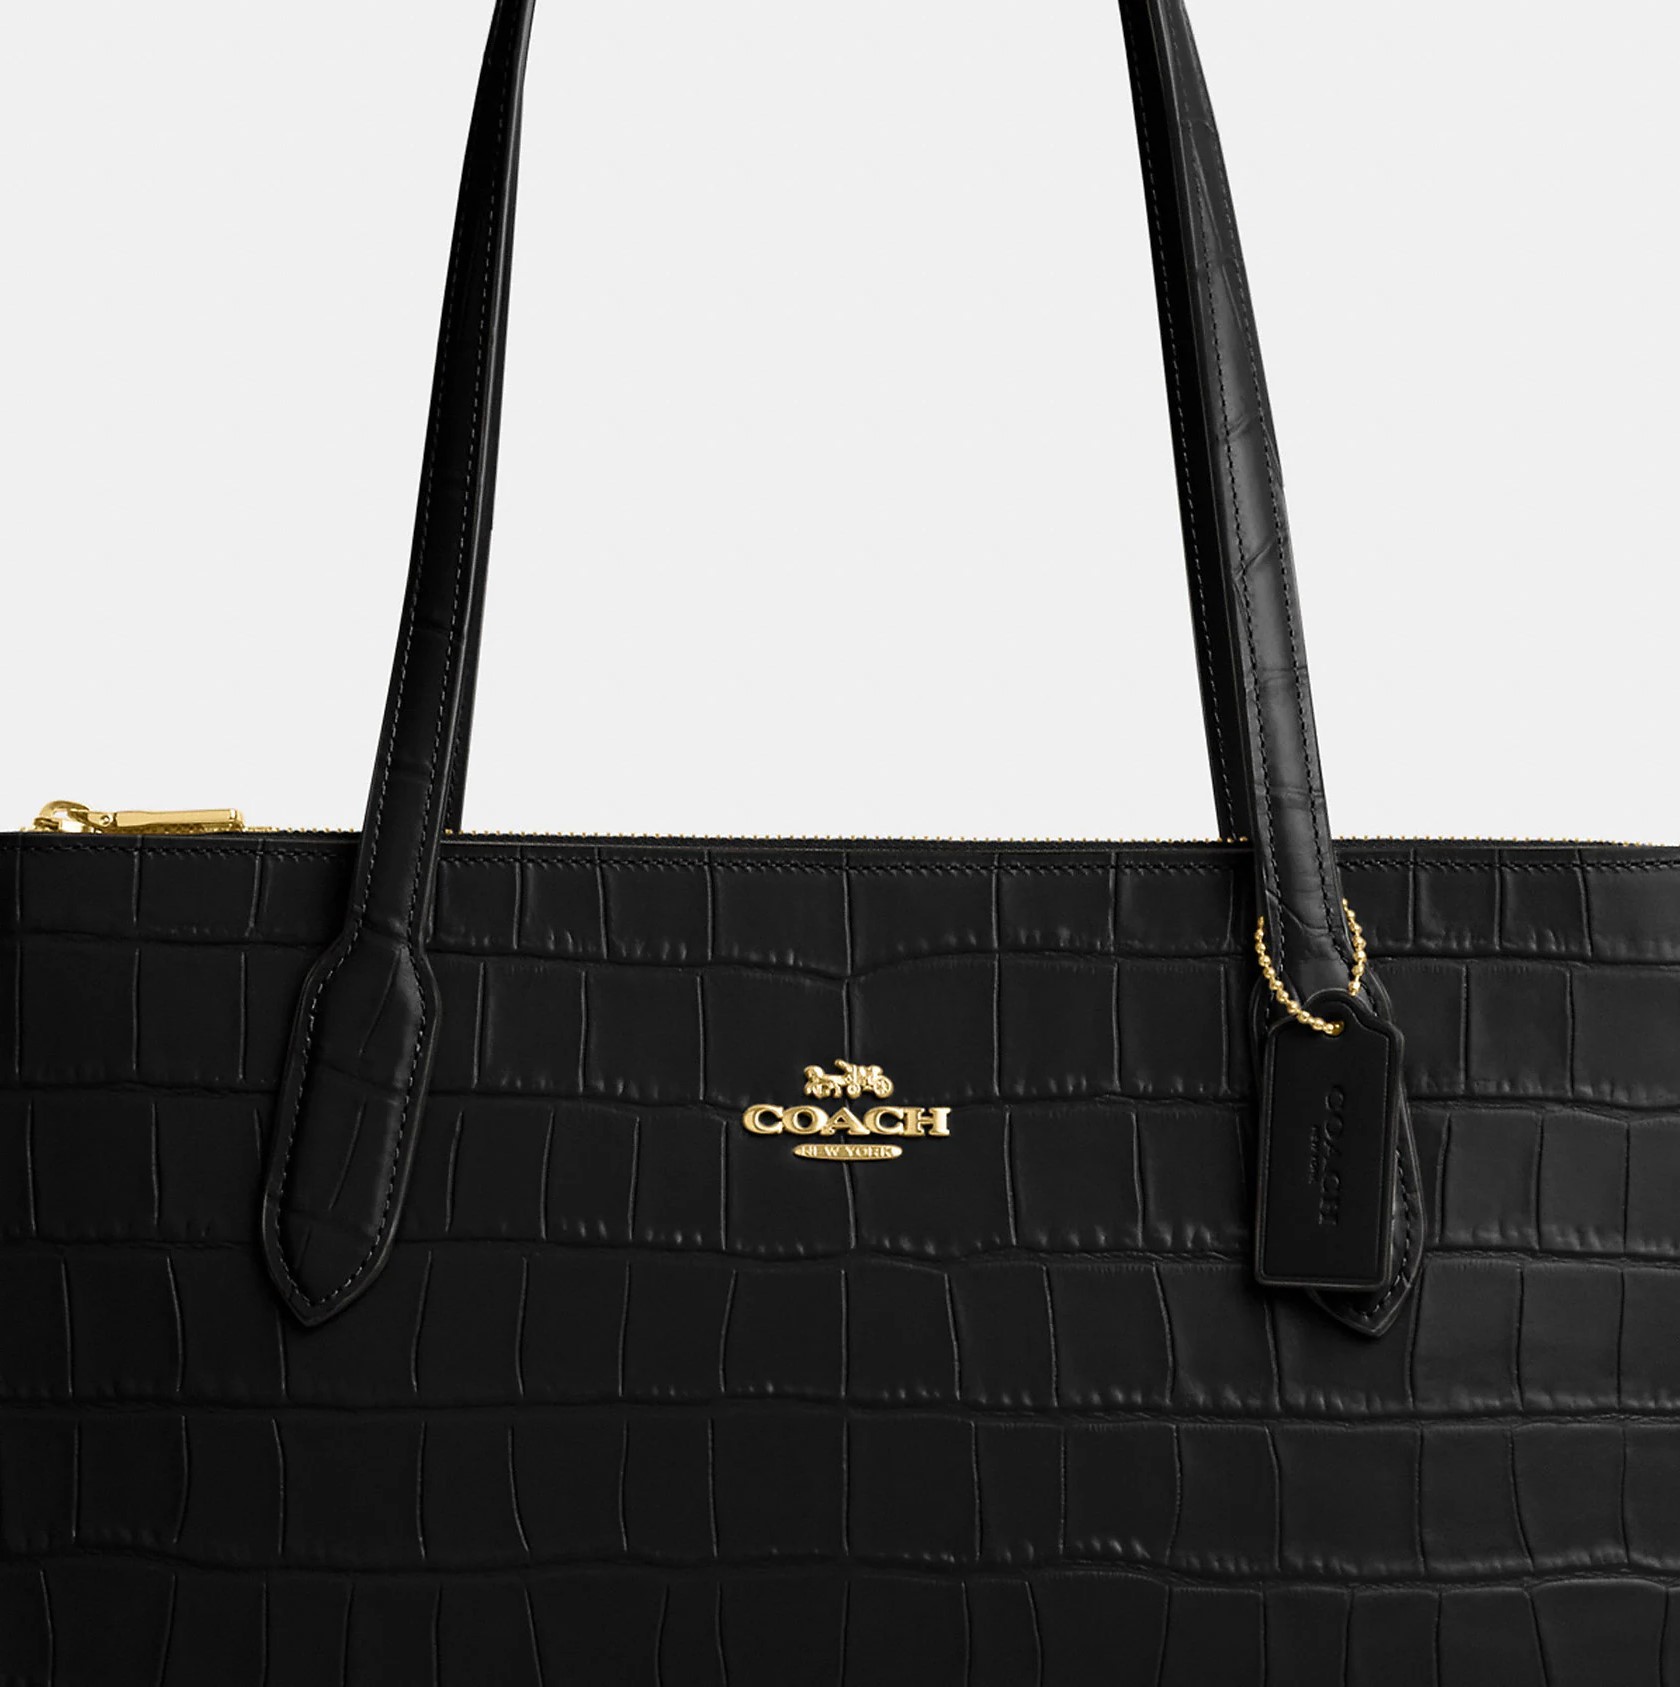 TÚI XÁCH COACH NỮ NINA TOTE CROCODILE-EMBOSSED LEATHER AND SMOOTH LEATHER BAG IN GOLD BLACK CL654 2